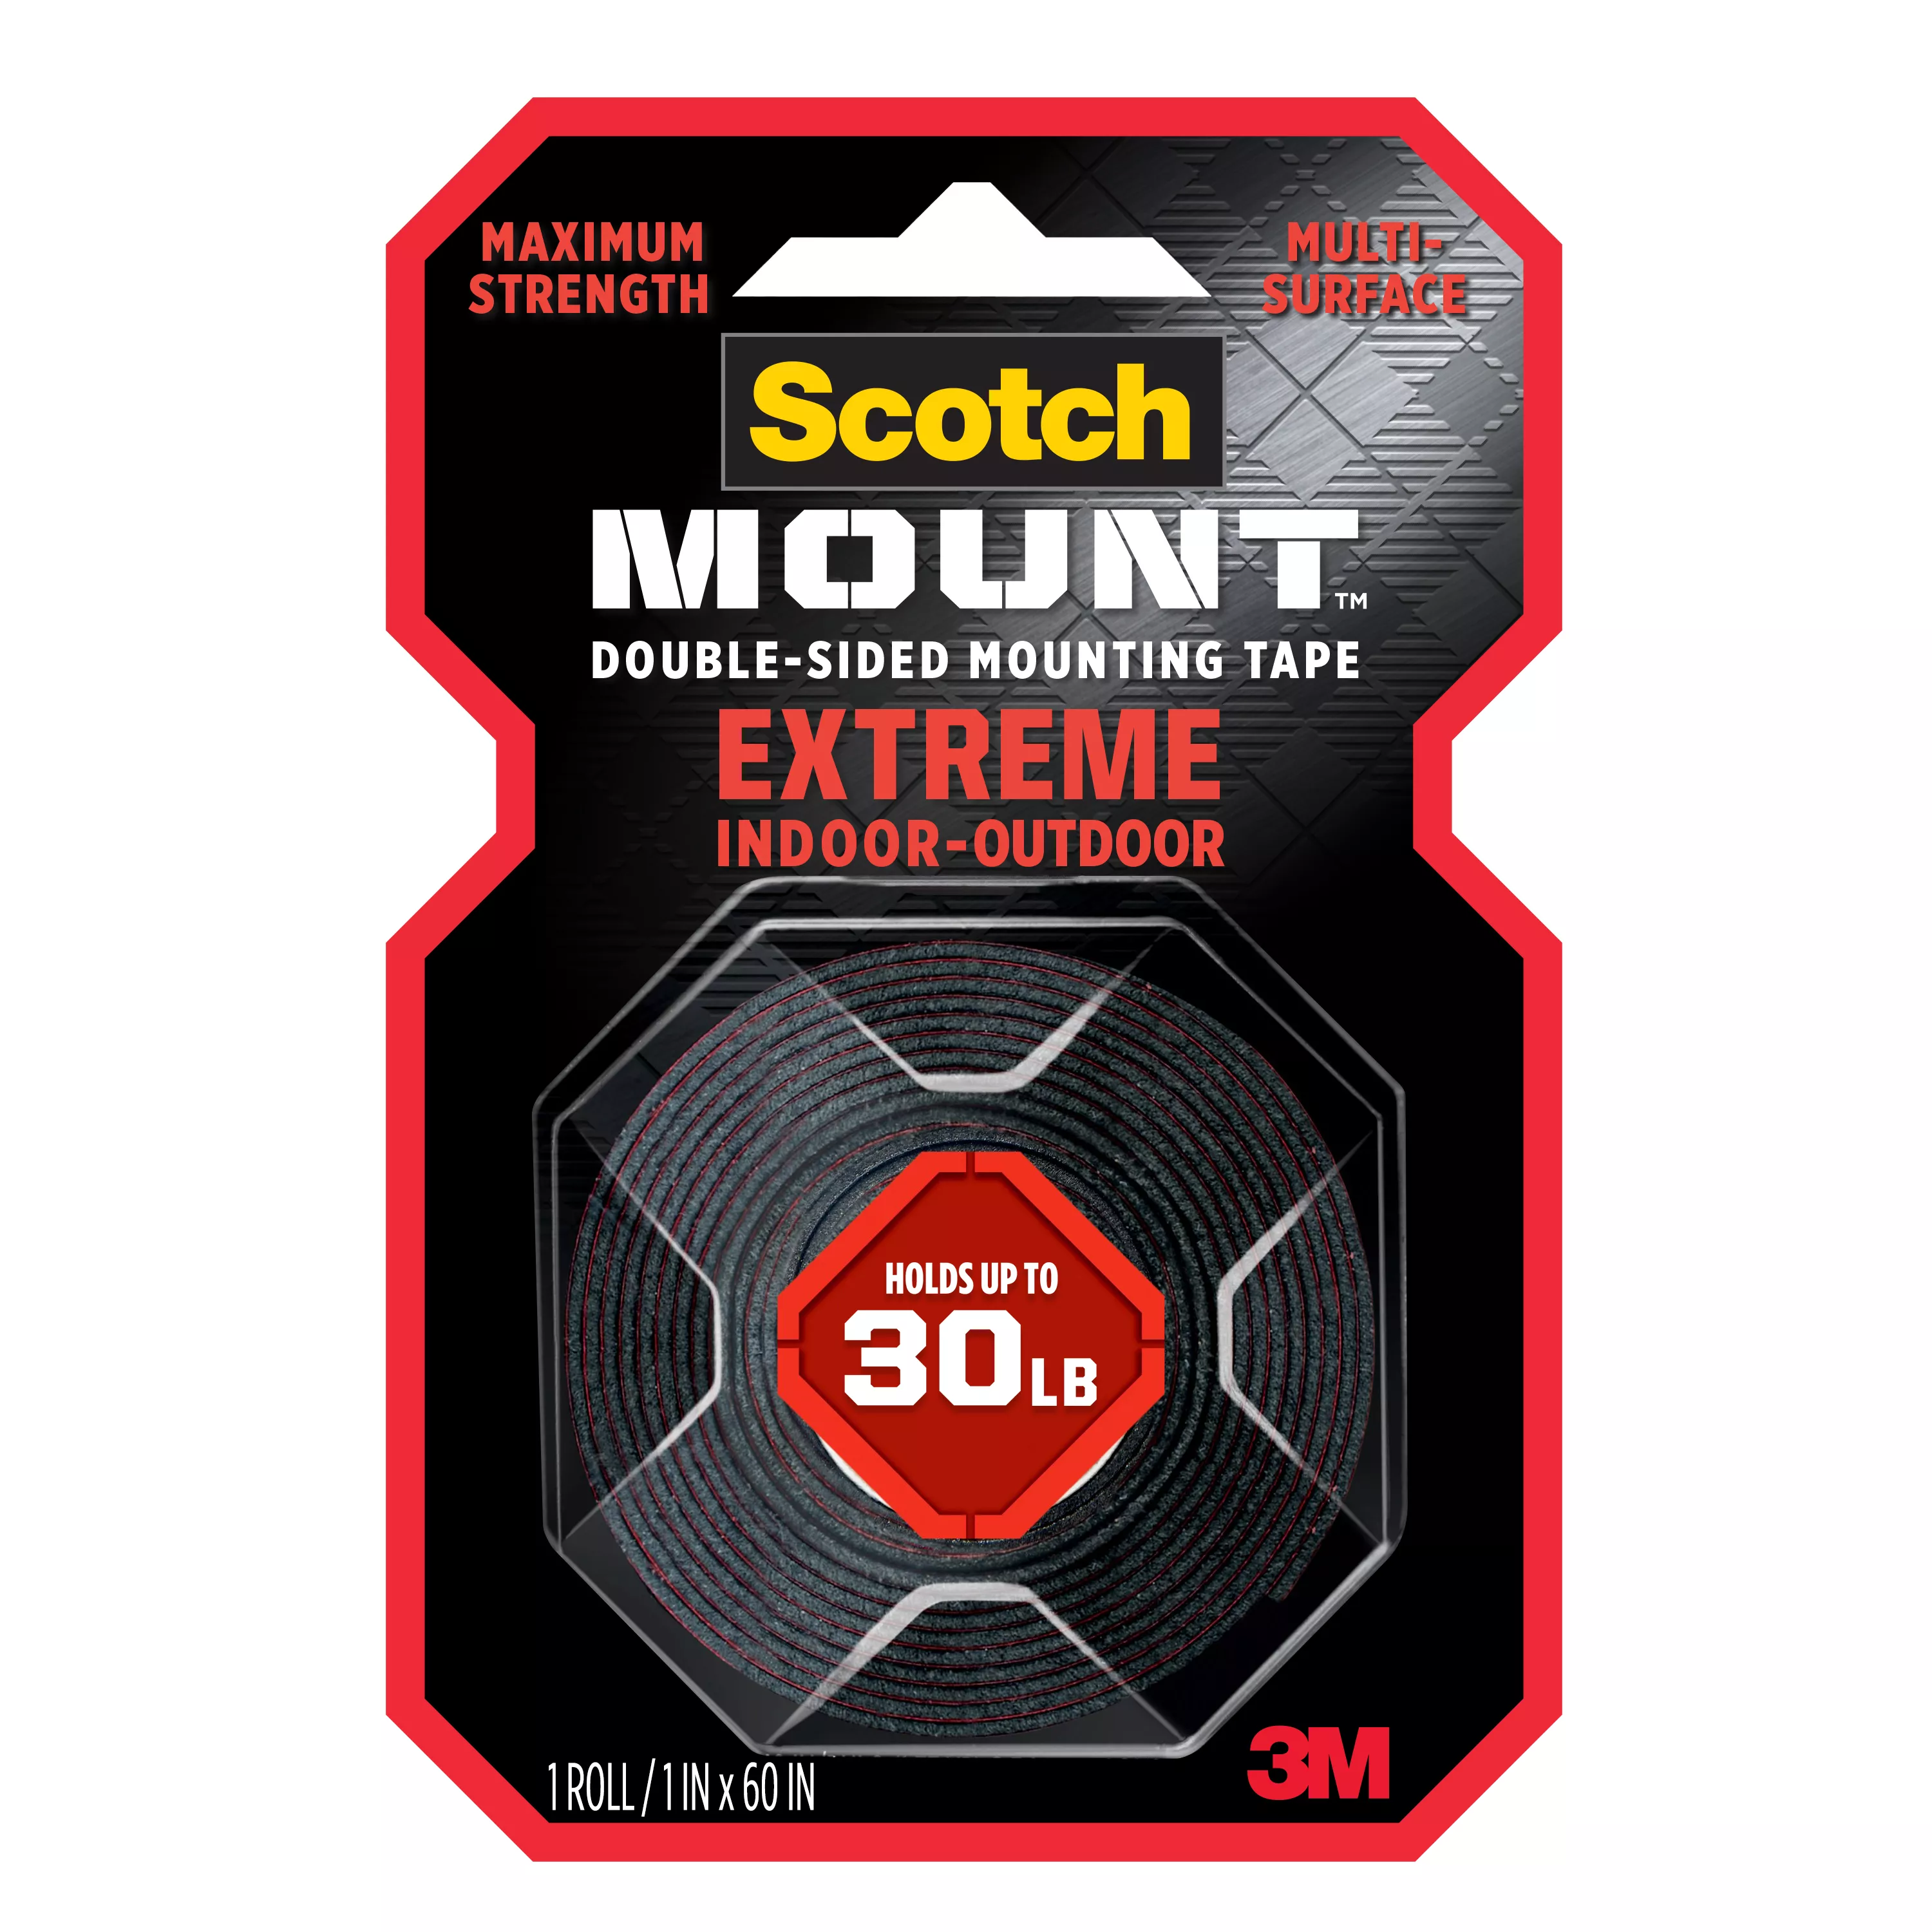 Scotch-Mount™ Extreme Double-Sided Mounting Tape 414H, 1 In X 60 In
(2,54 Cm X 1,52 M)